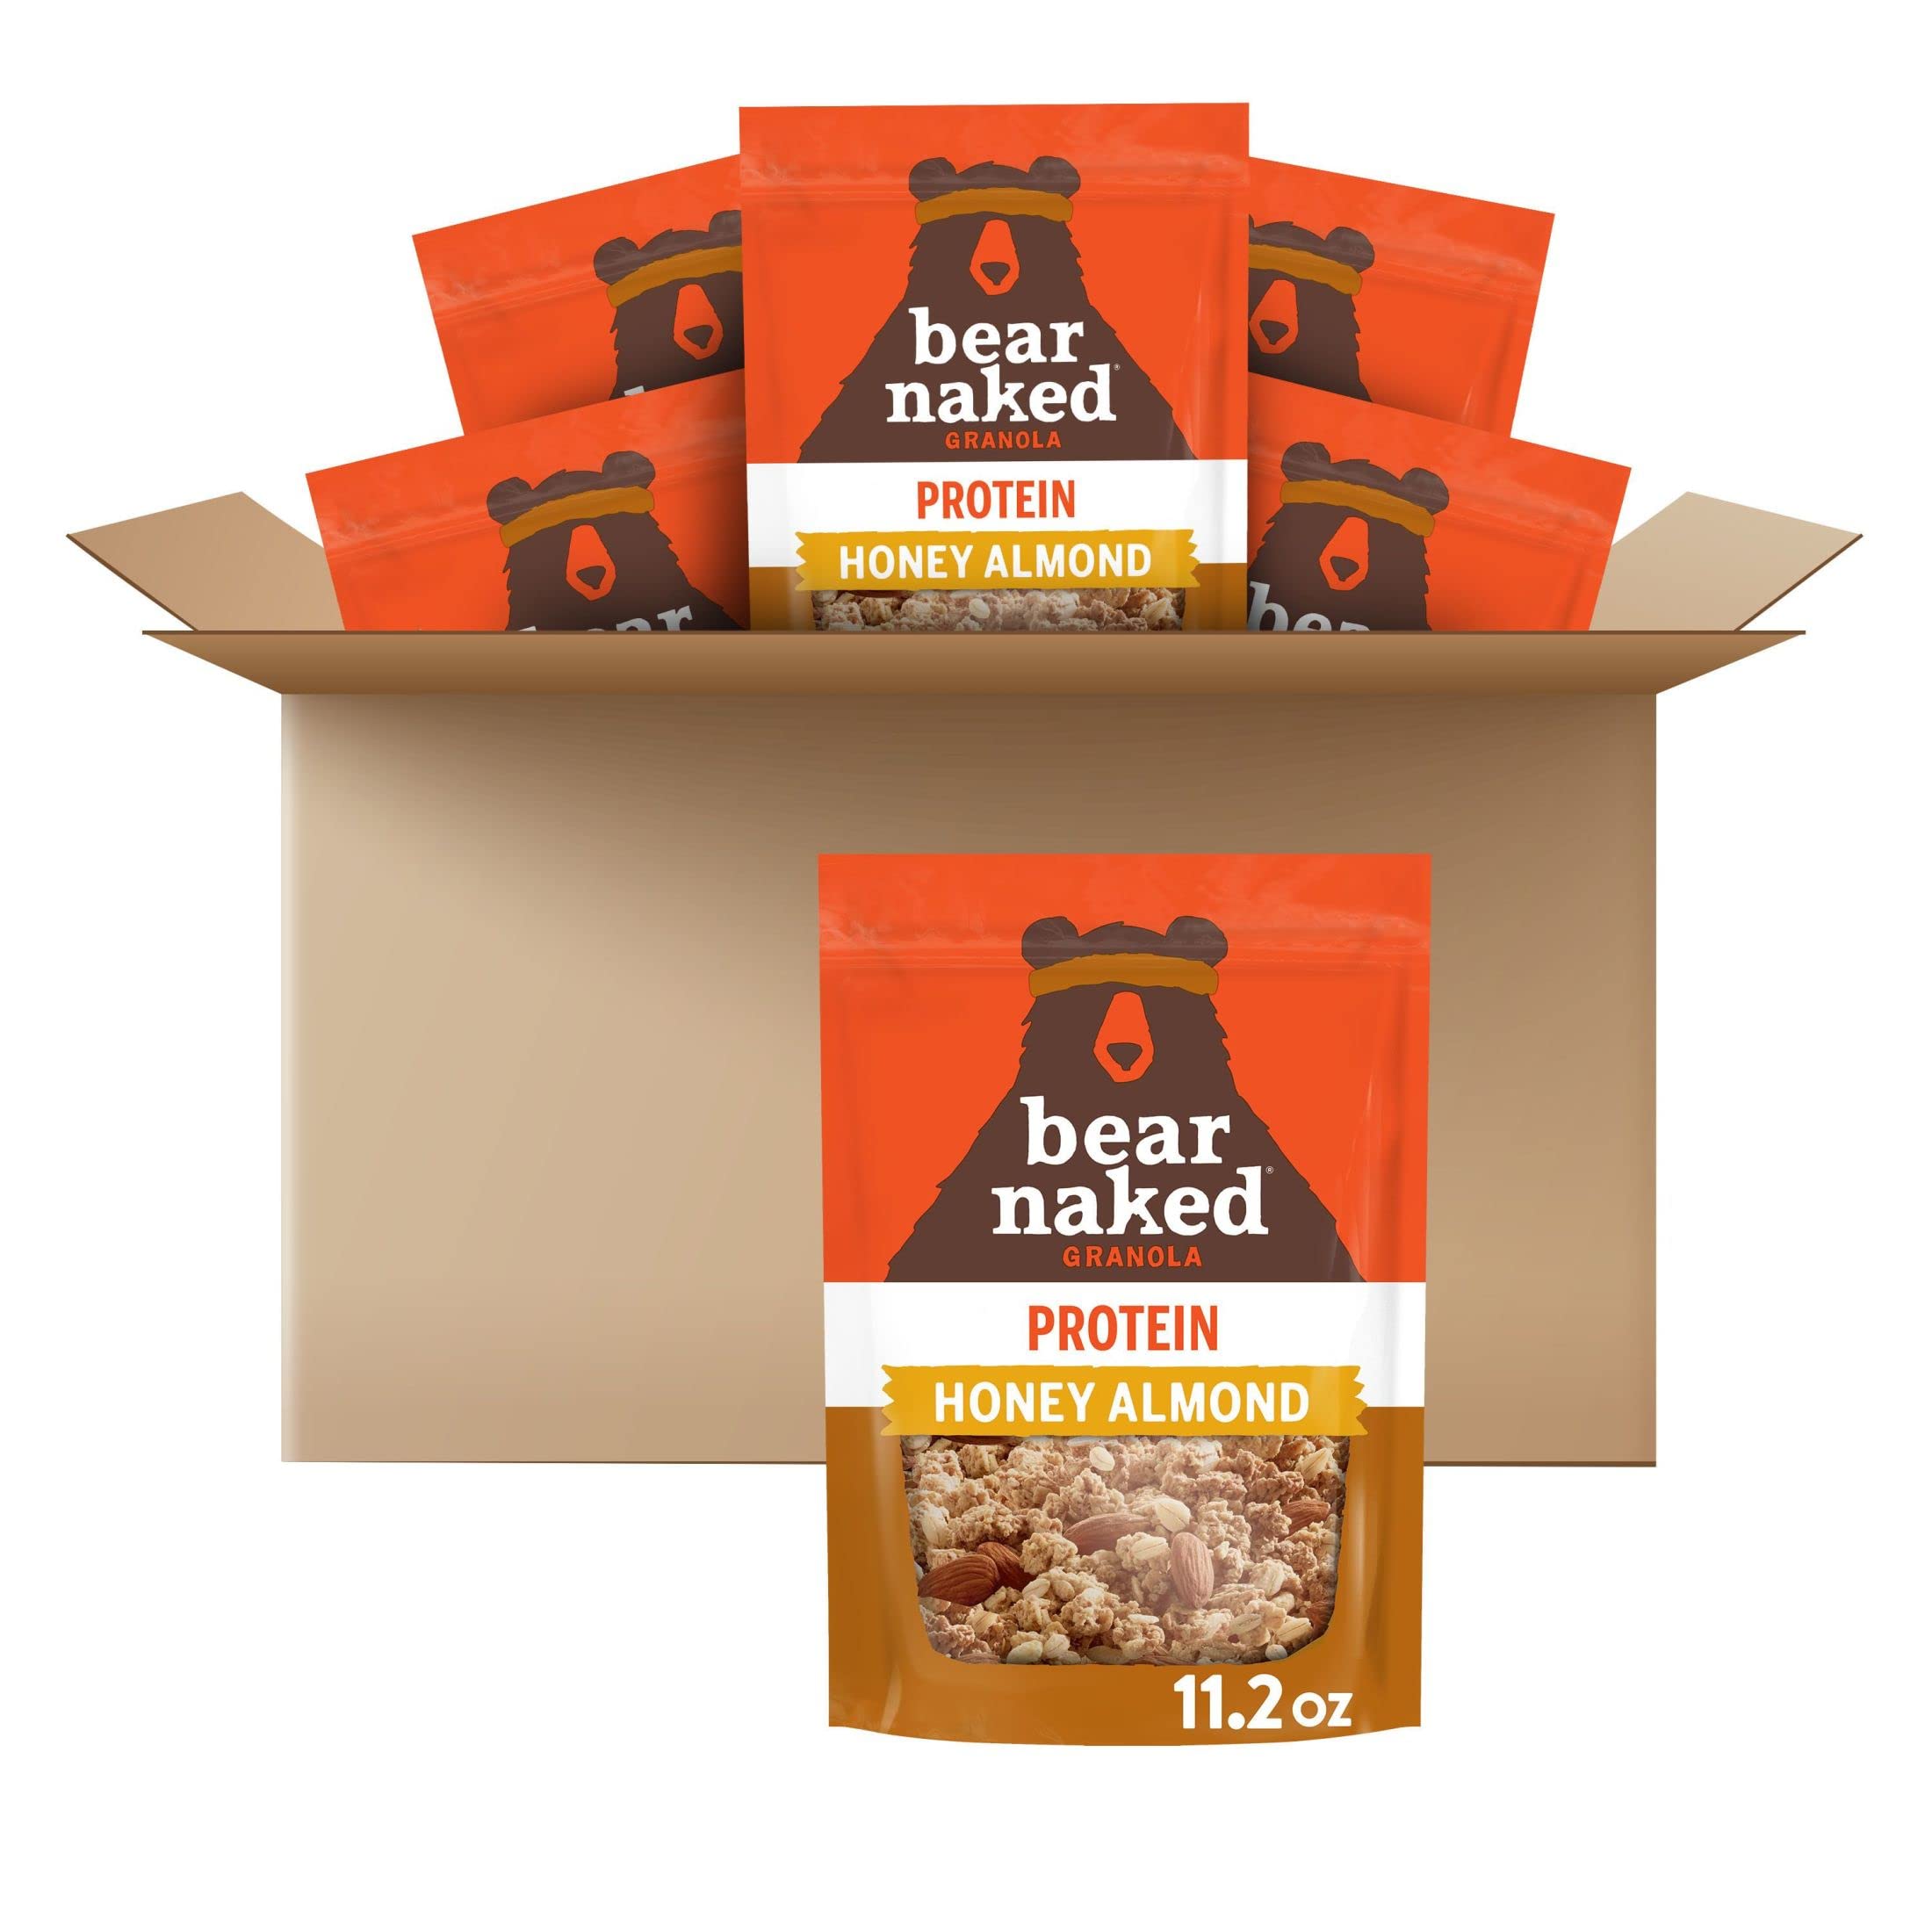 6-Bags 11.2-Oz Bear Naked Protein Granola Cereal (Honey Almond) $20.20 w/ S&S + Free Shipping w/ Prime or on $25+